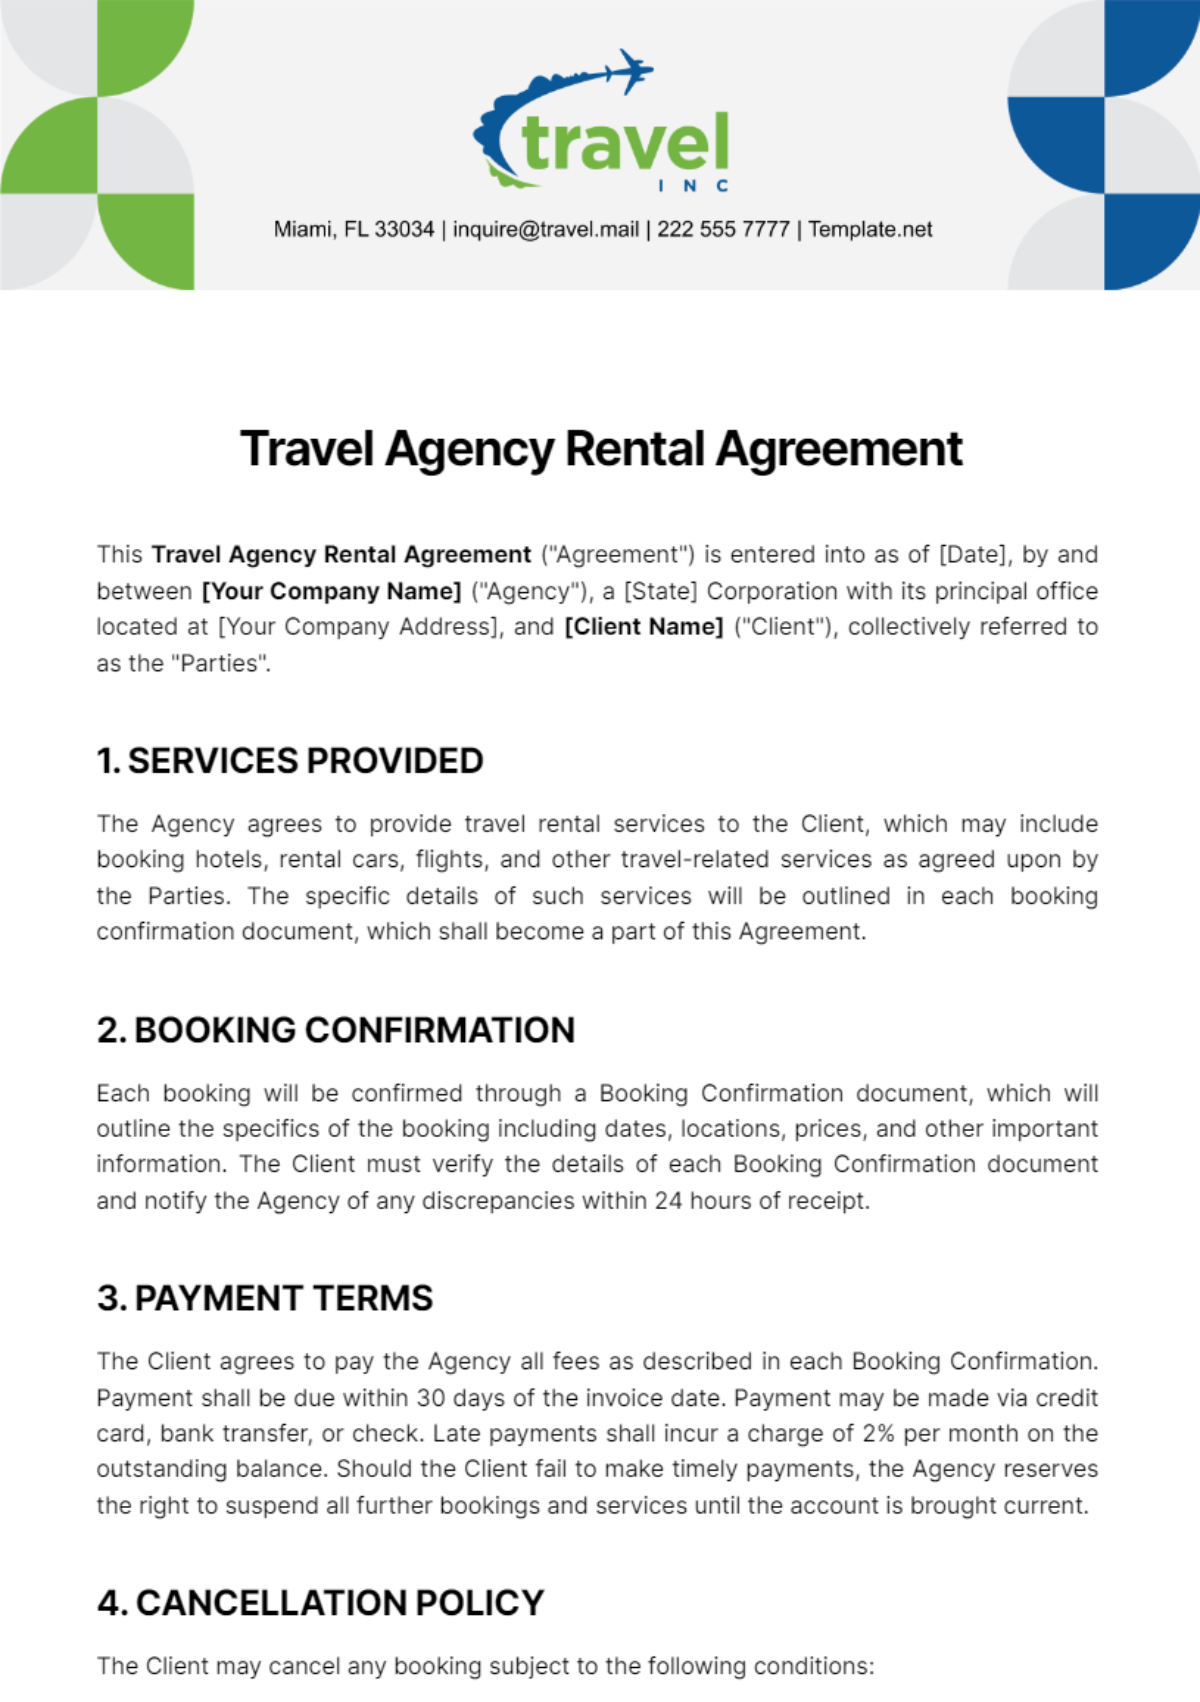 Travel Agency Rental Agreement Template